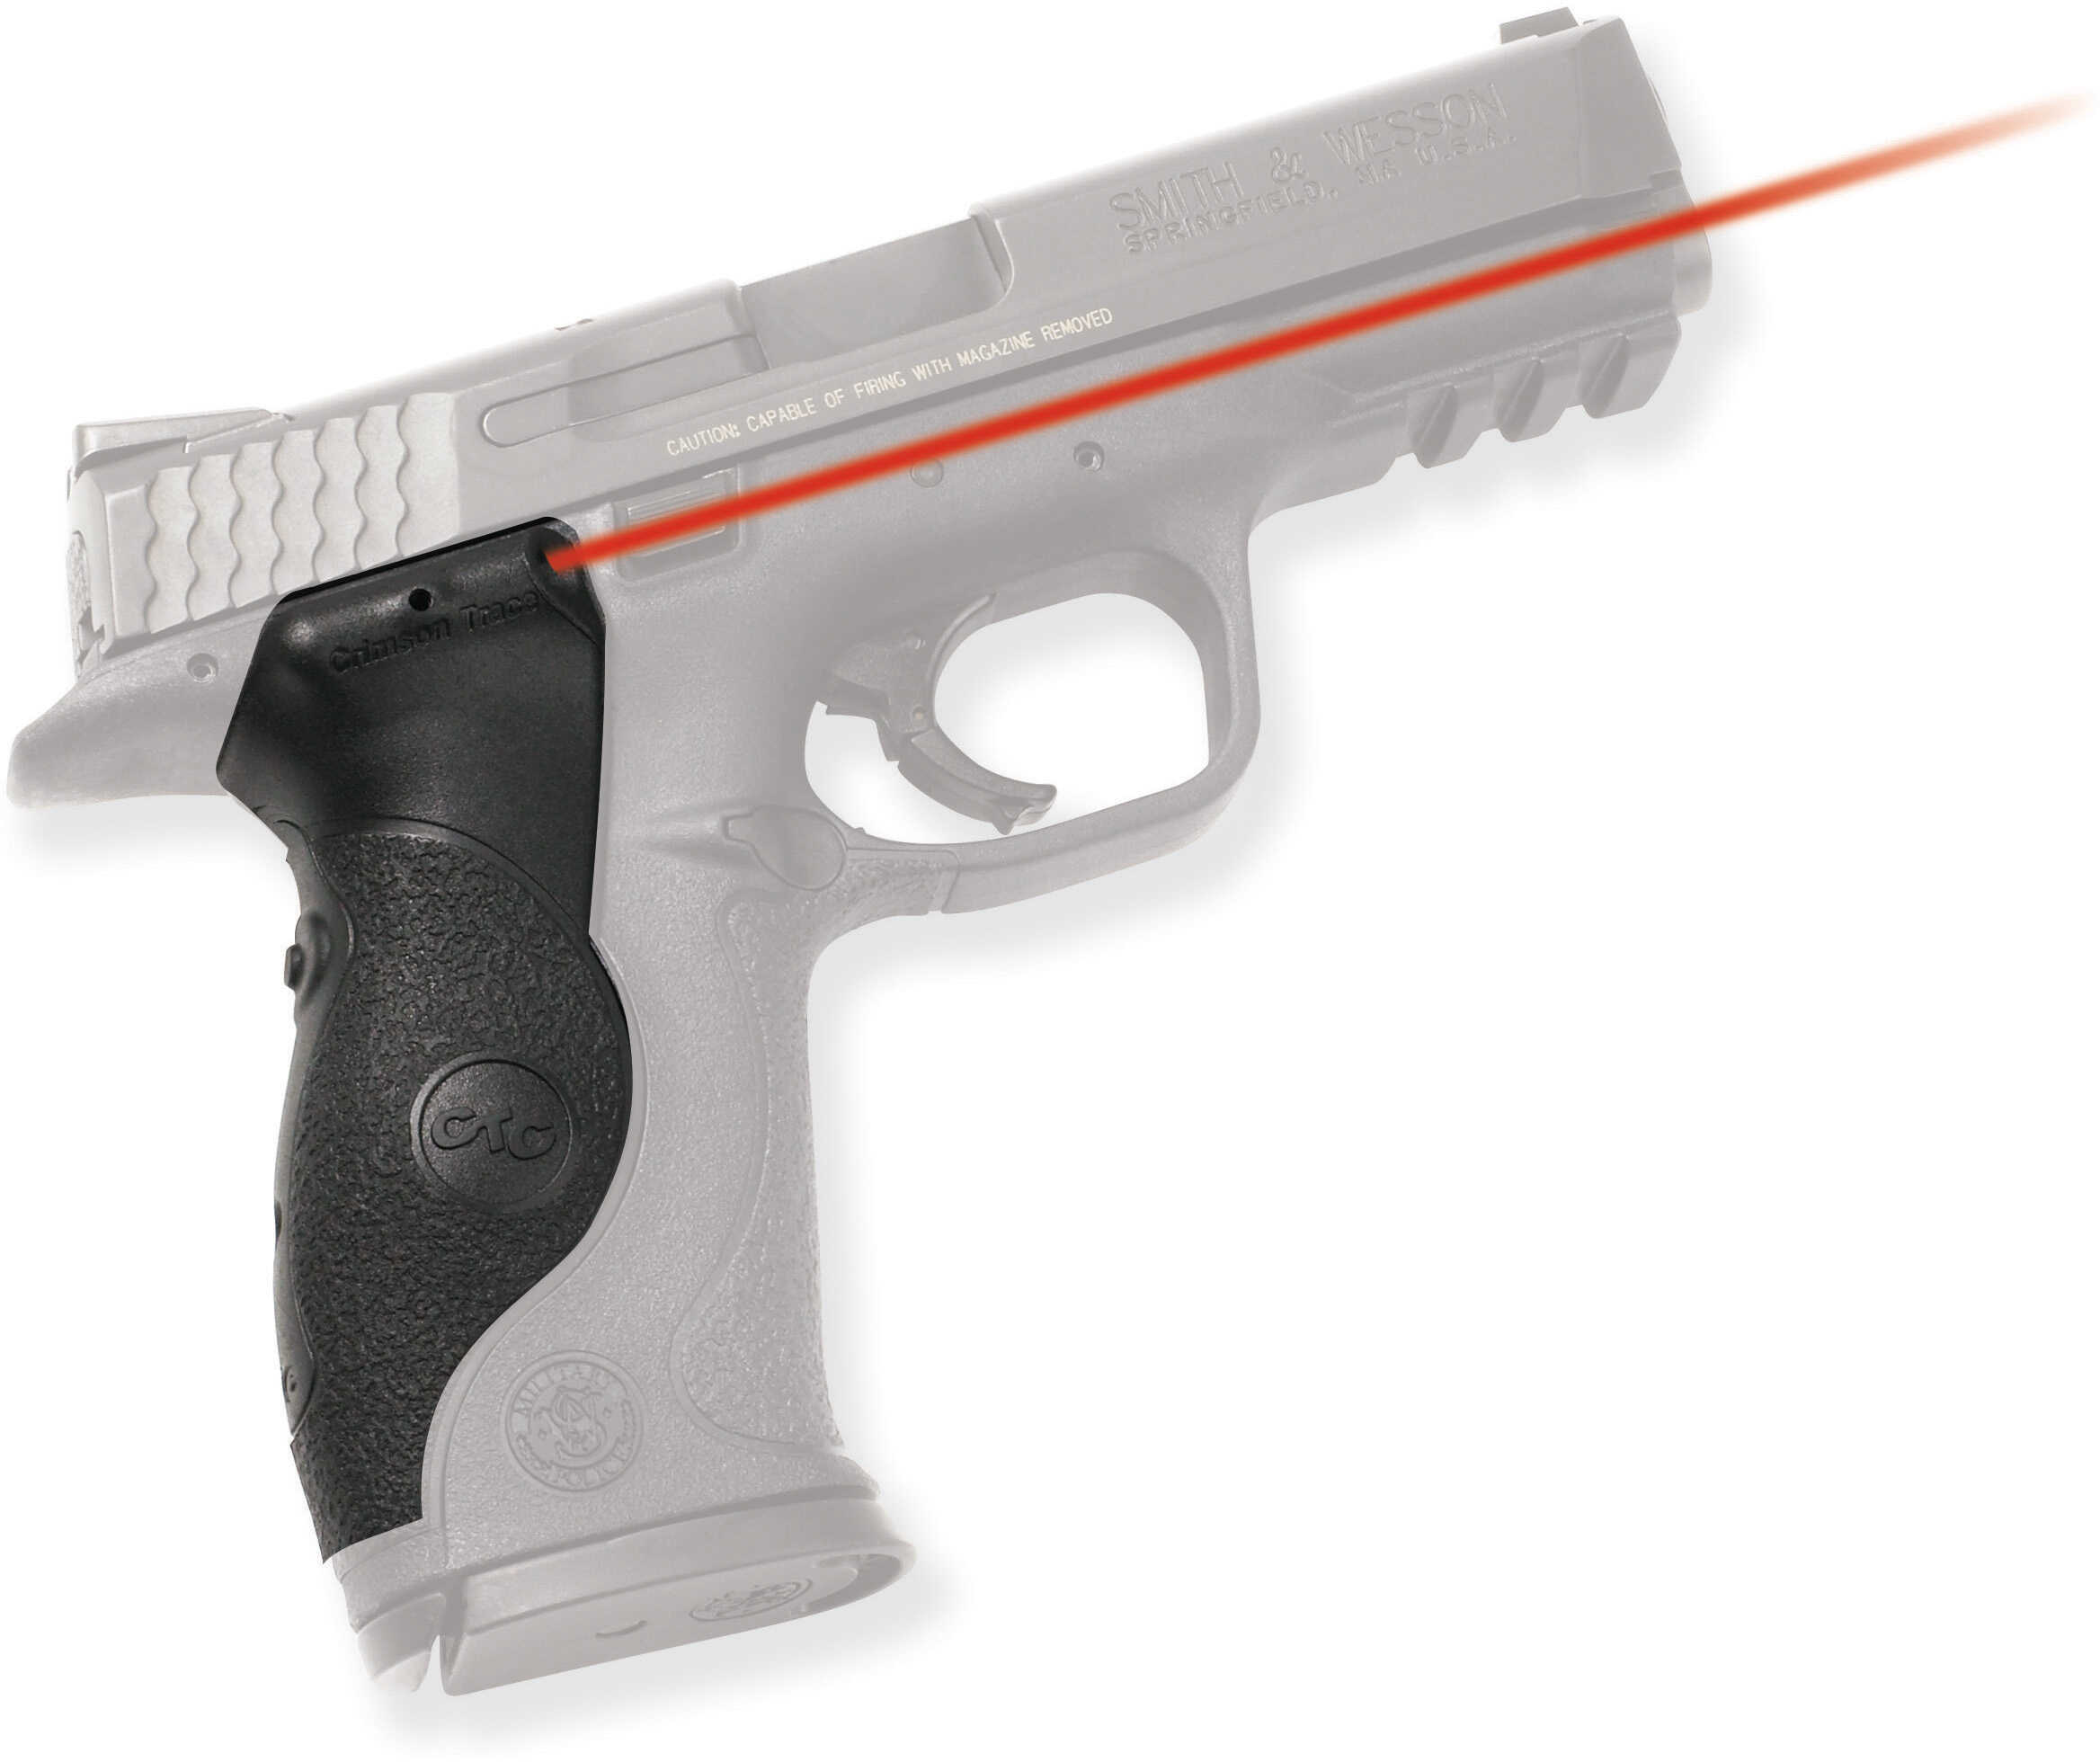 Crimson Trace Smith & Wesson Lasergrips for M&P Red